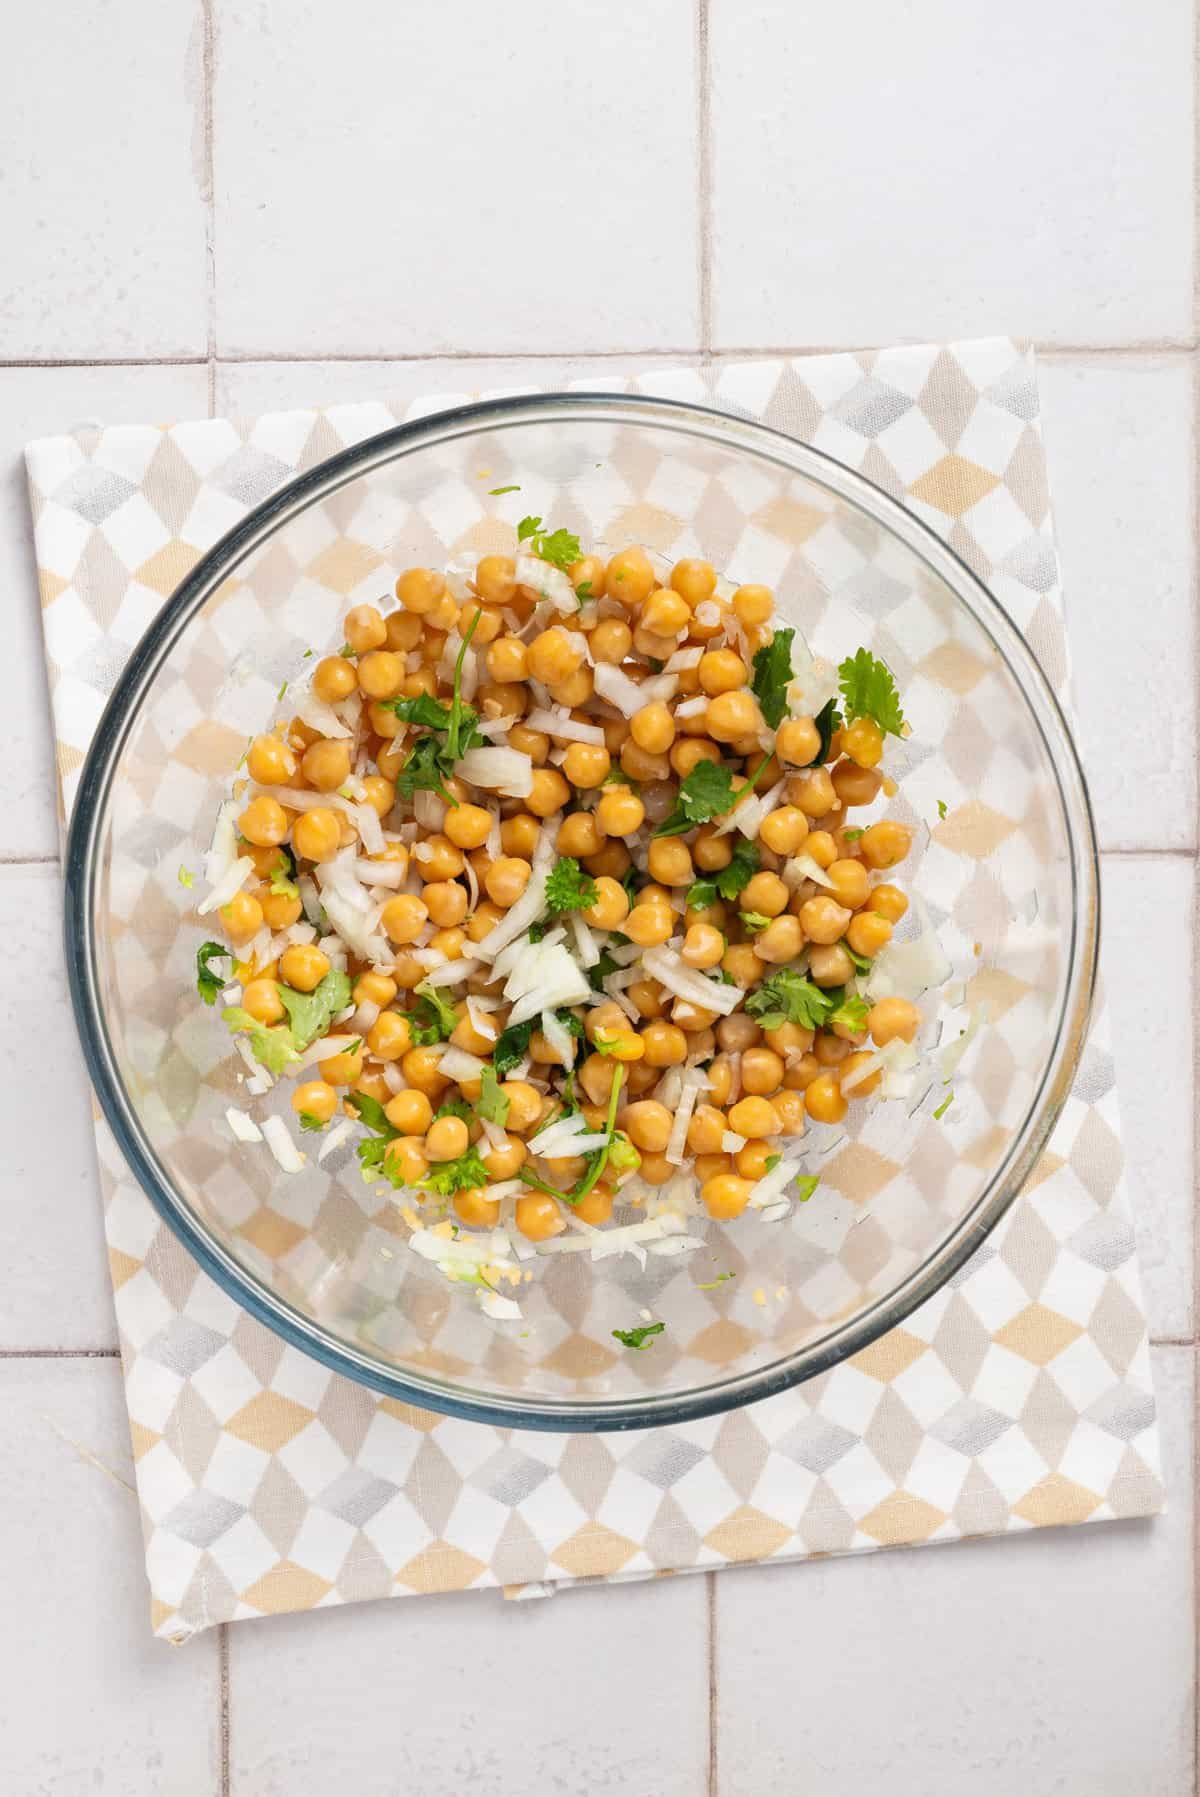 An overhead image of chickpeas and herbs in a large clear bowl.